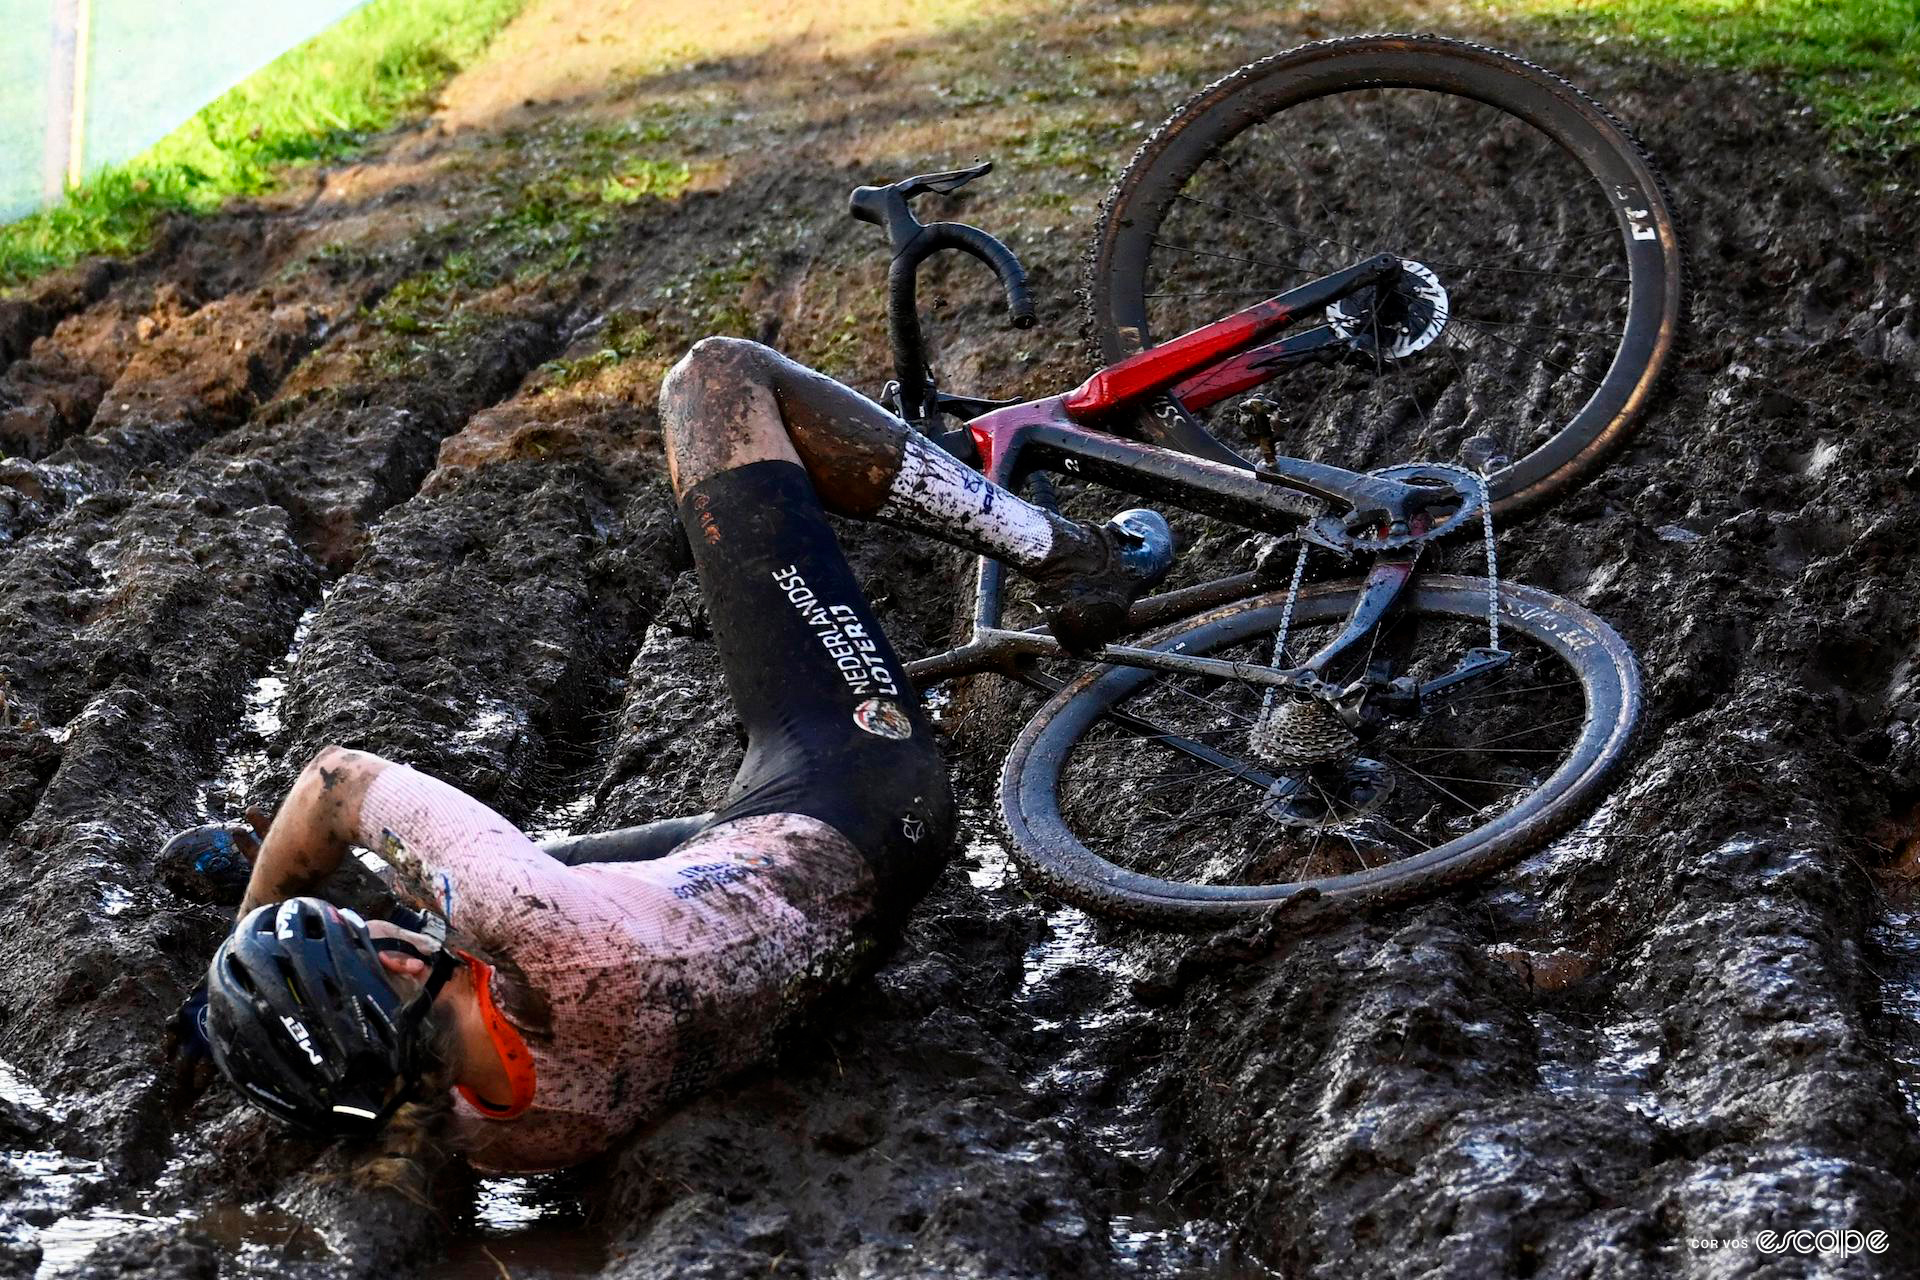 Aniek van Alphen lies on her side after slipping in in the deep mud during the european cx champs.